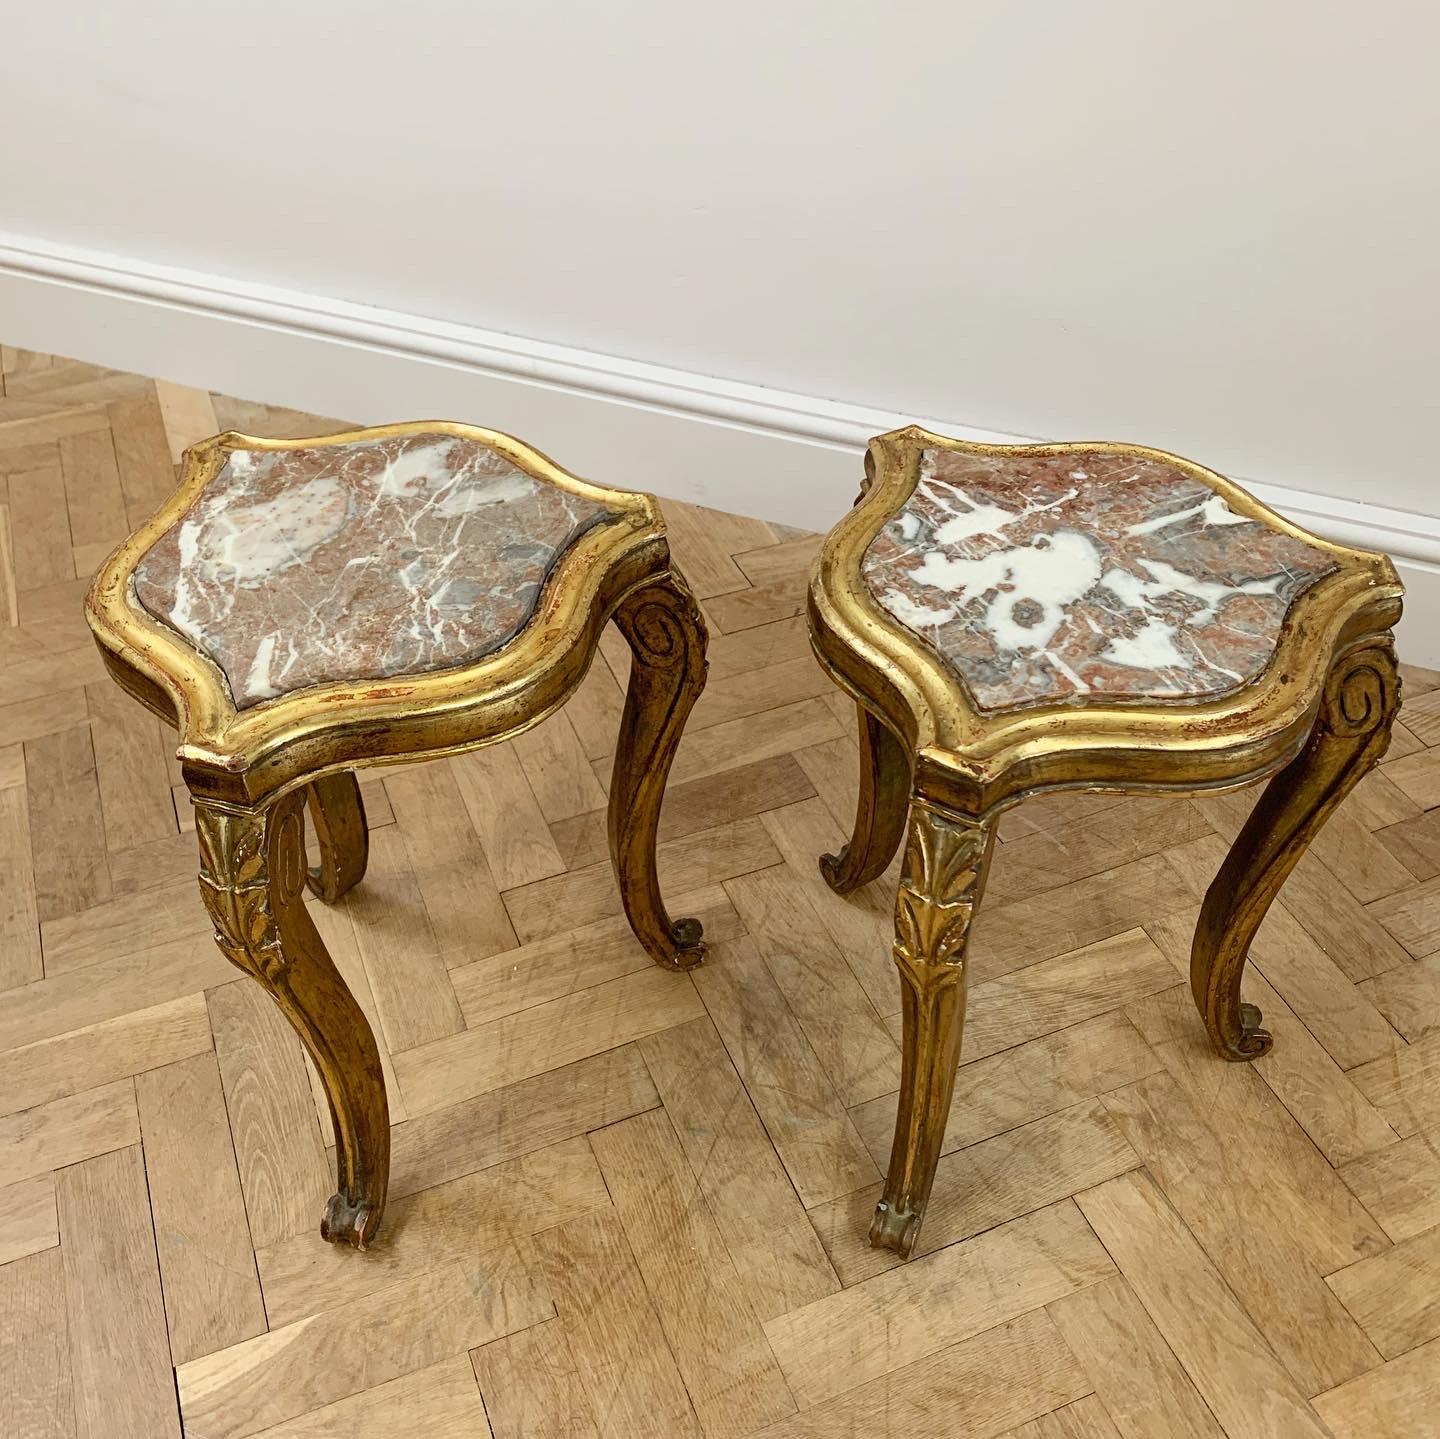 An impactful pair of gilt wood vase stands with breche d’alep inserts to the shaped shield tops of elegant form.

French, mid nineteenth century.